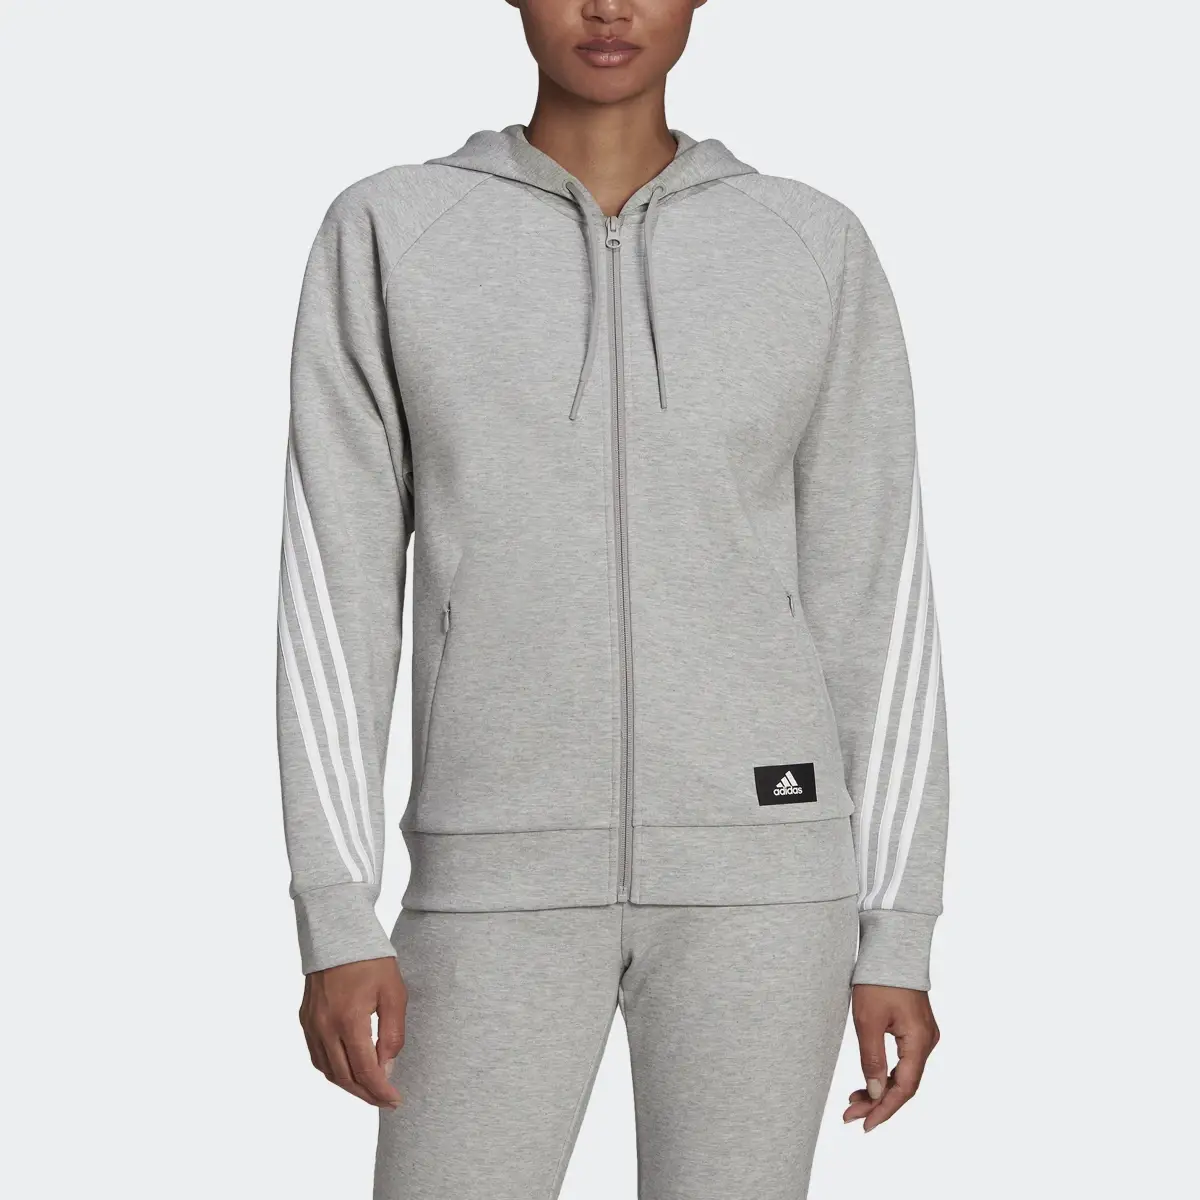 Adidas Sportswear Future Icons 3-Stripes Hooded Track Top. 1